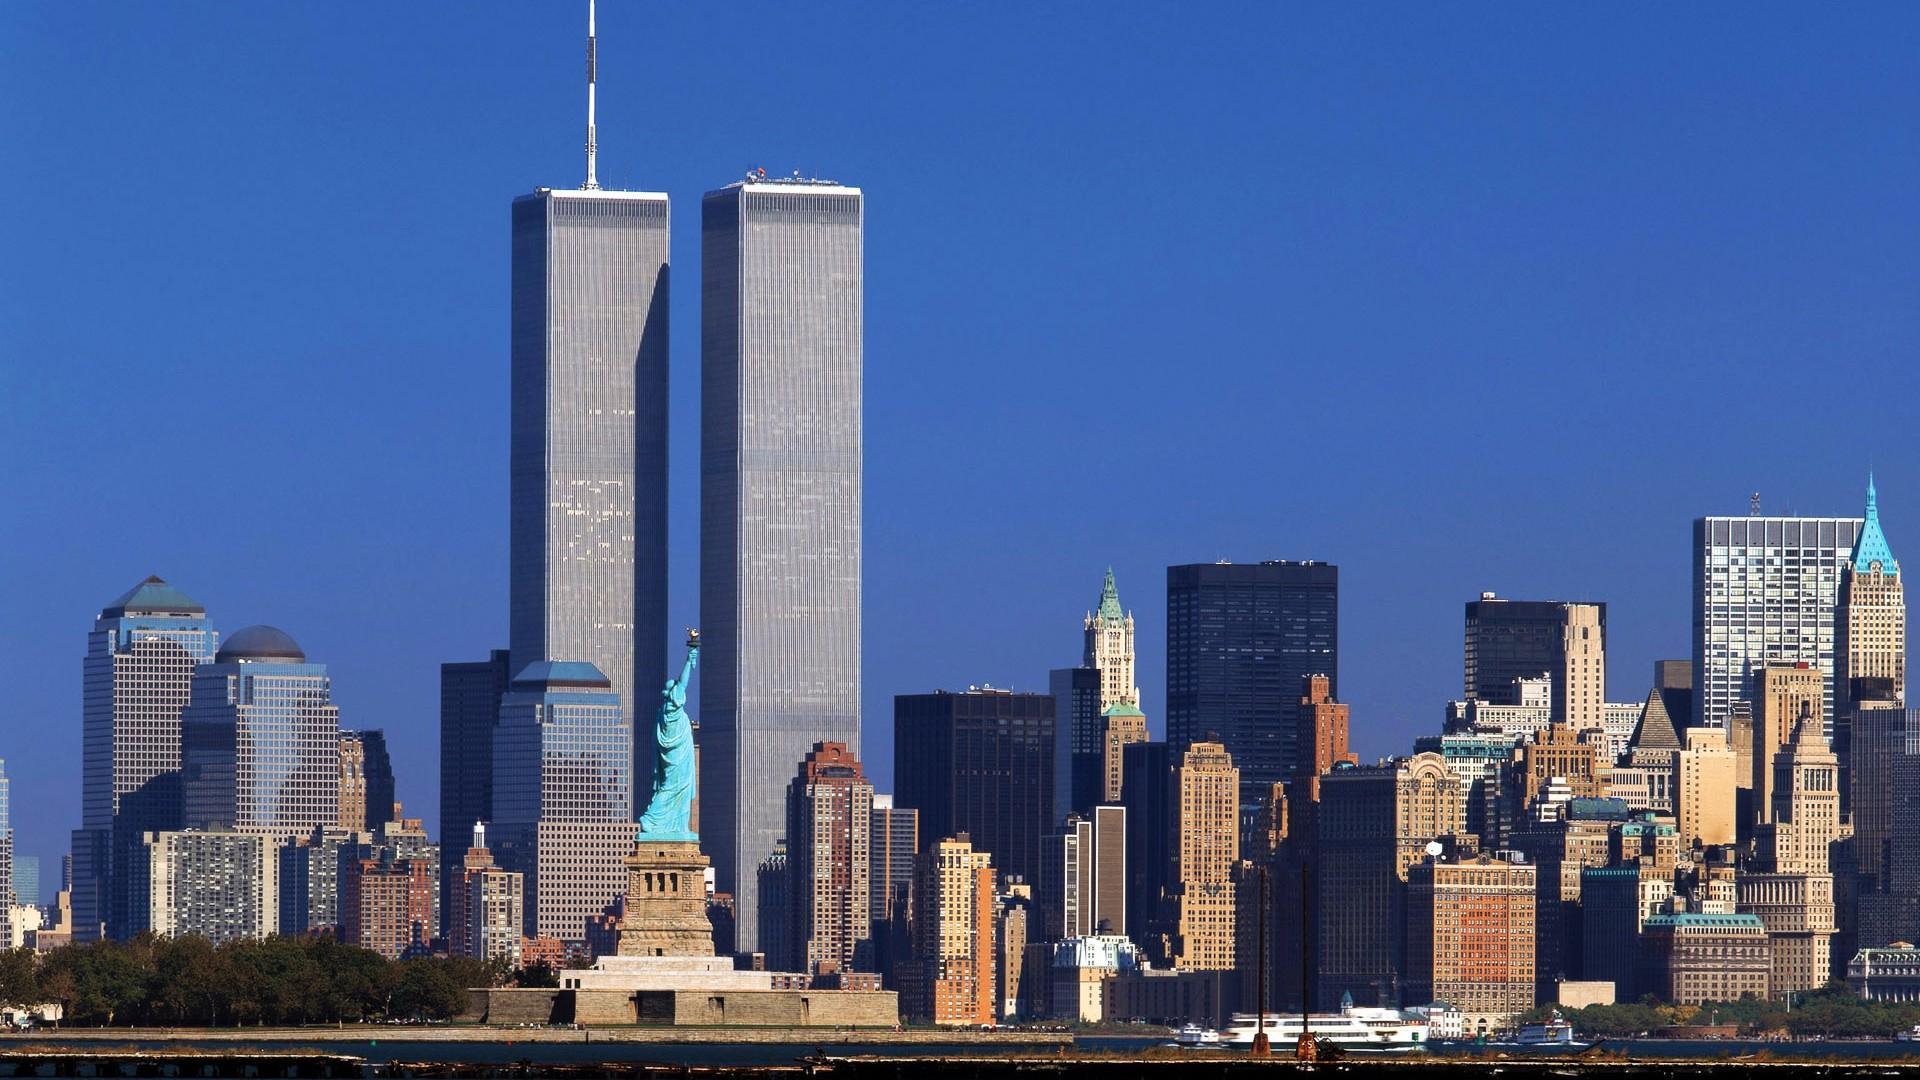 Wallpaper of the twin towers in New York 1920x1080 1080p HD